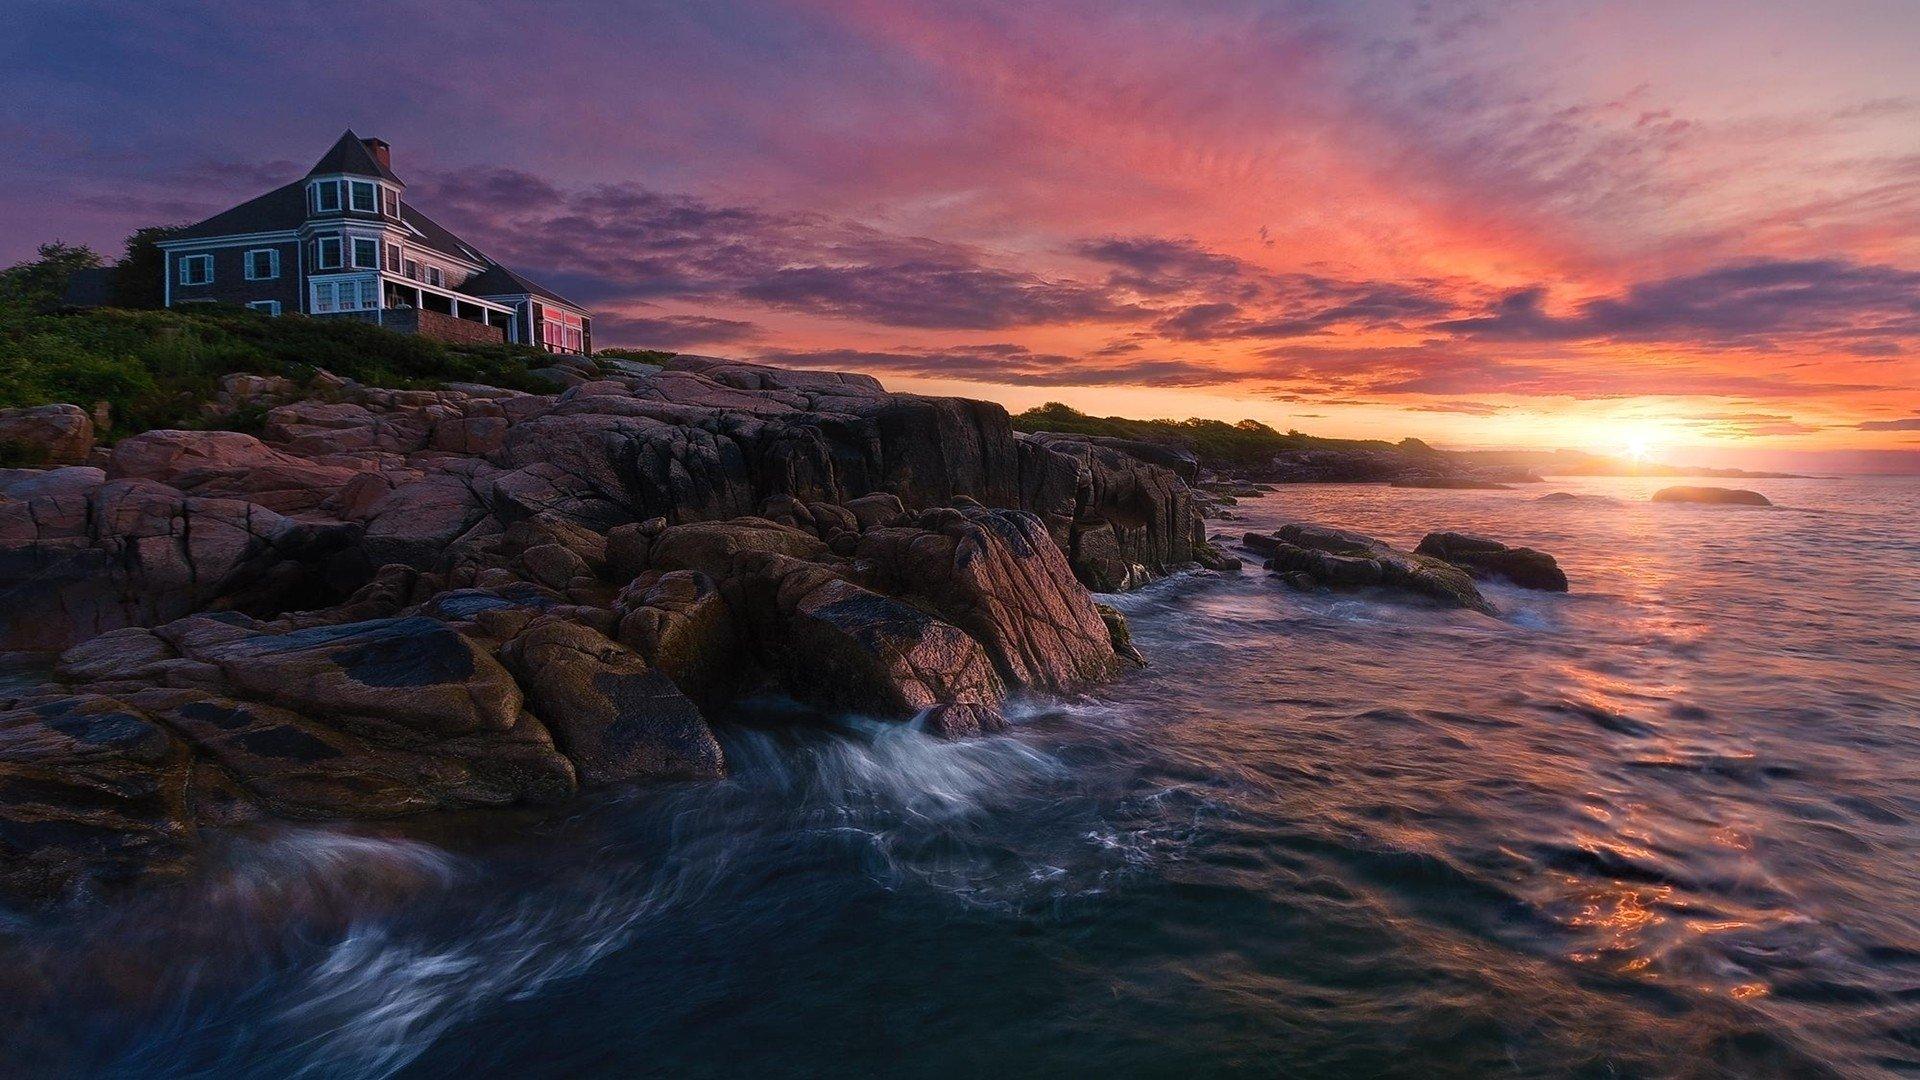 Sunset over House on Rocky Coast HD Wallpaper. Background Image